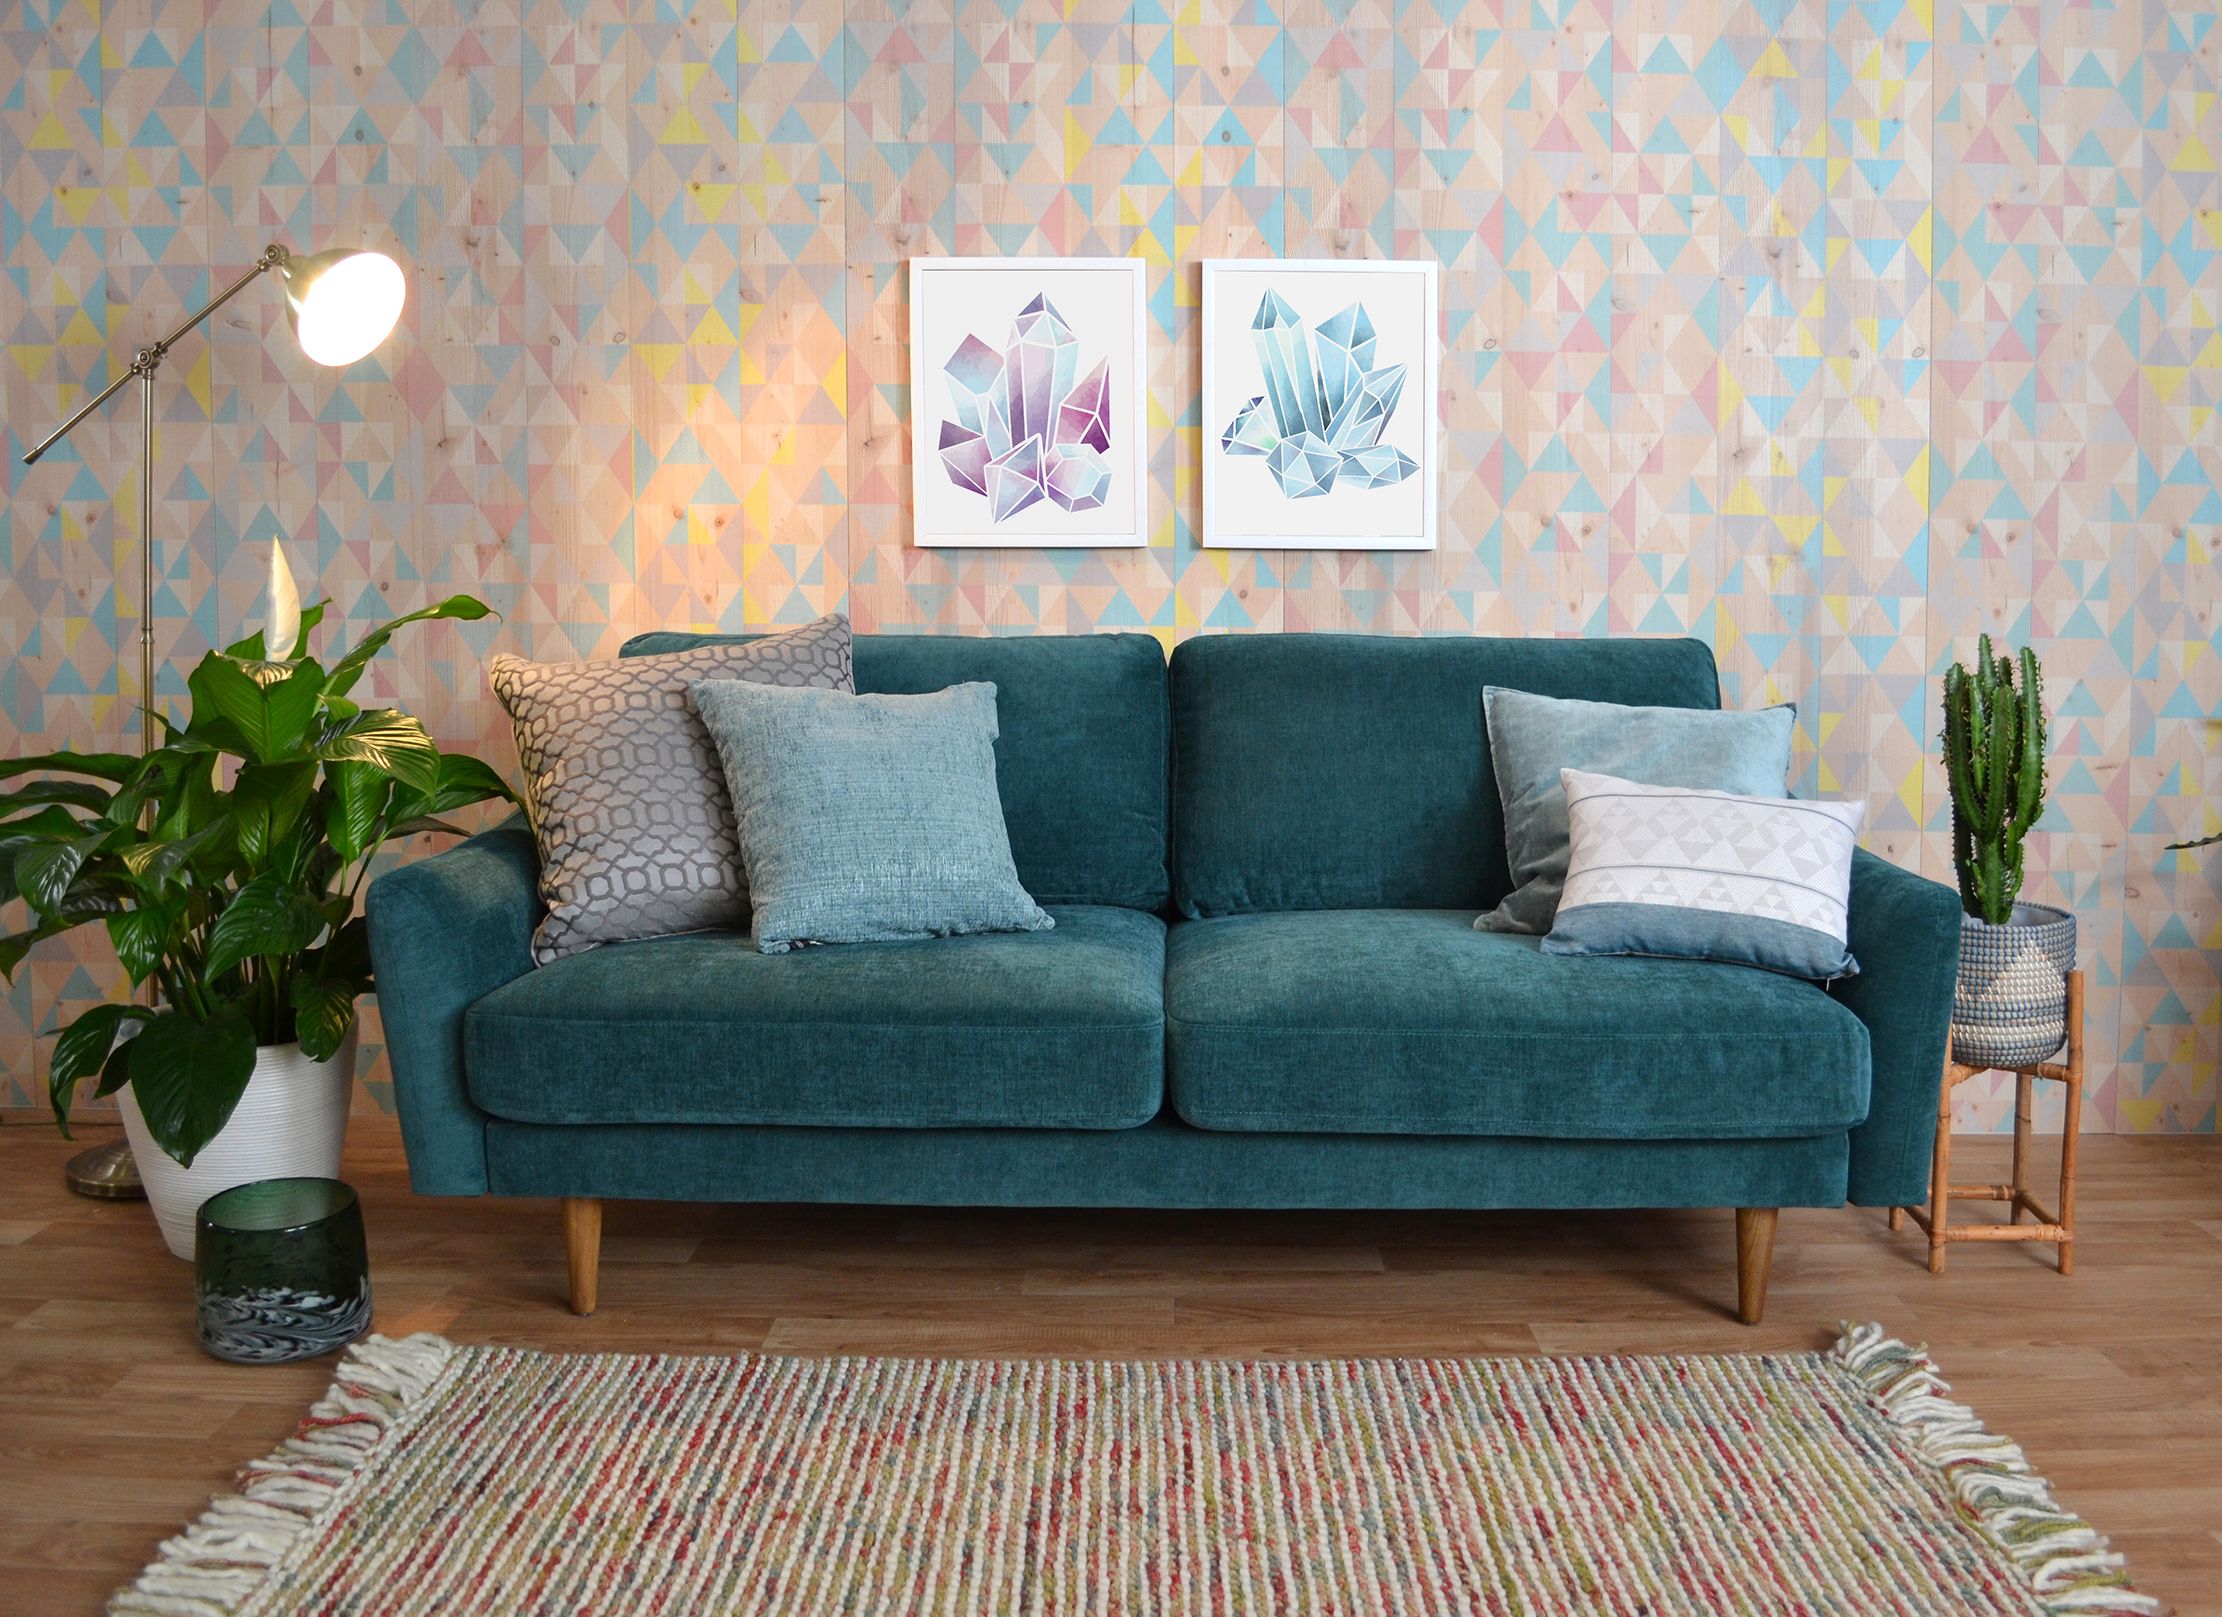 UK's First Sofa In A Box, Snug Shack, Has Just Launched